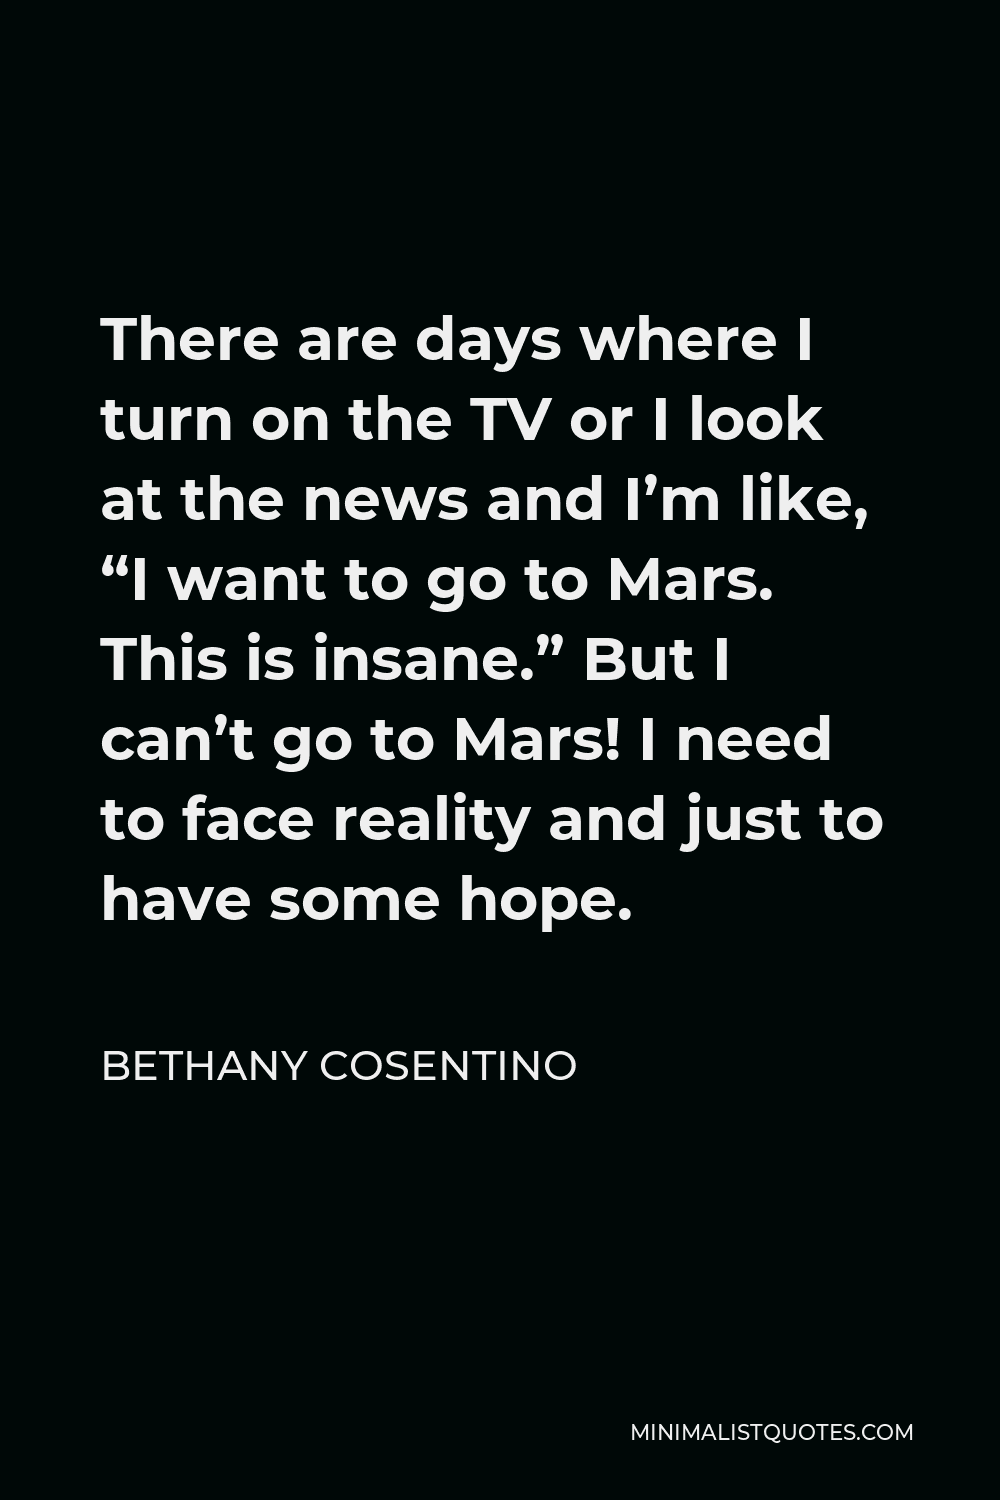 Bethany Cosentino Quote - There are days where I turn on the TV or I look at the news and I’m like, “I want to go to Mars. This is insane.” But I can’t go to Mars! I need to face reality and just to have some hope.